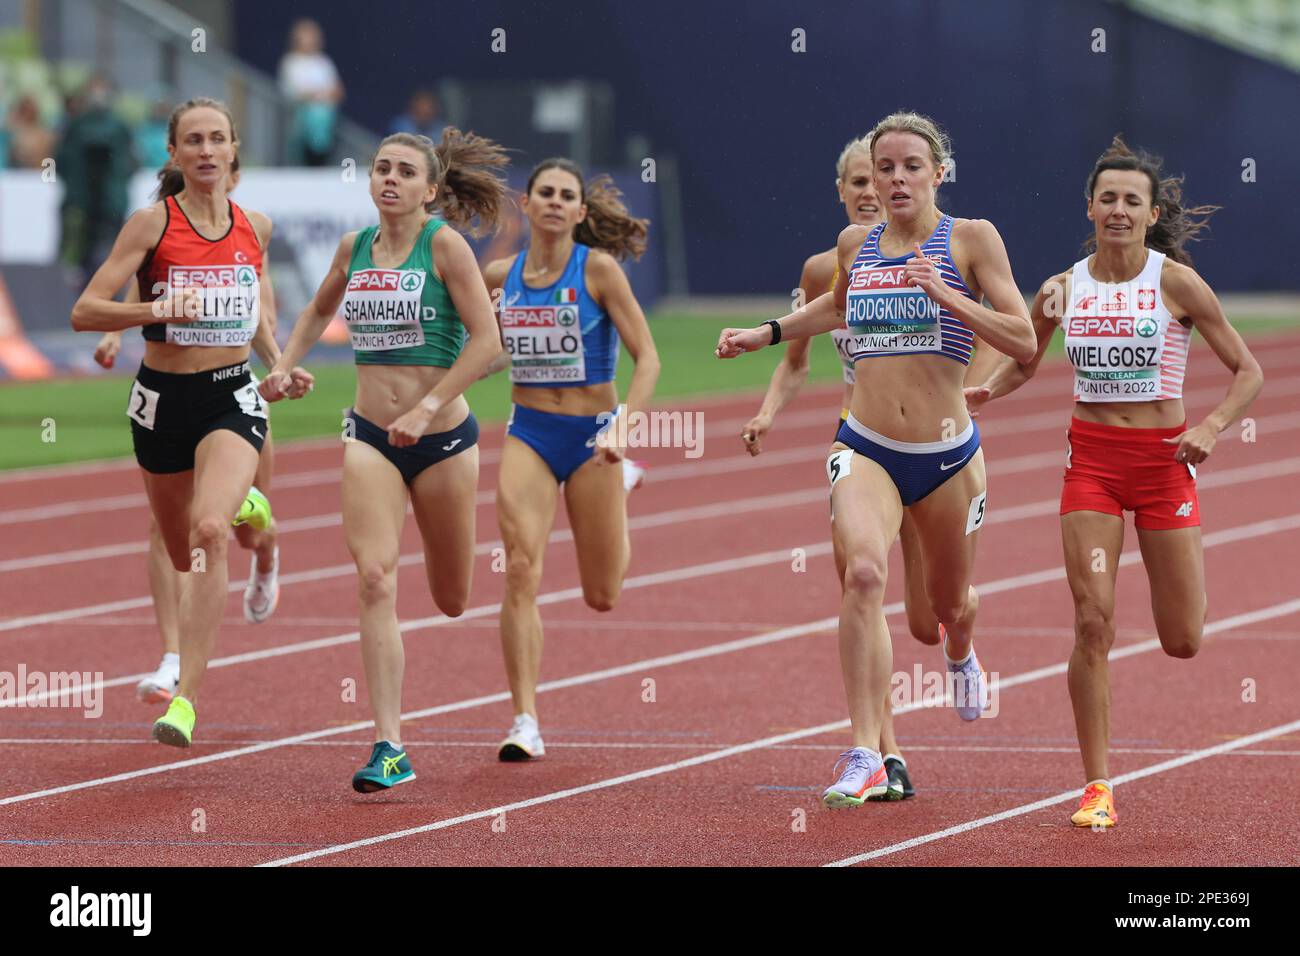 Louise SHANAHAN &  Keely HODGKINSON finishing in the 800m Semi Final at the European Athletics Championship 2022 Stock Photo